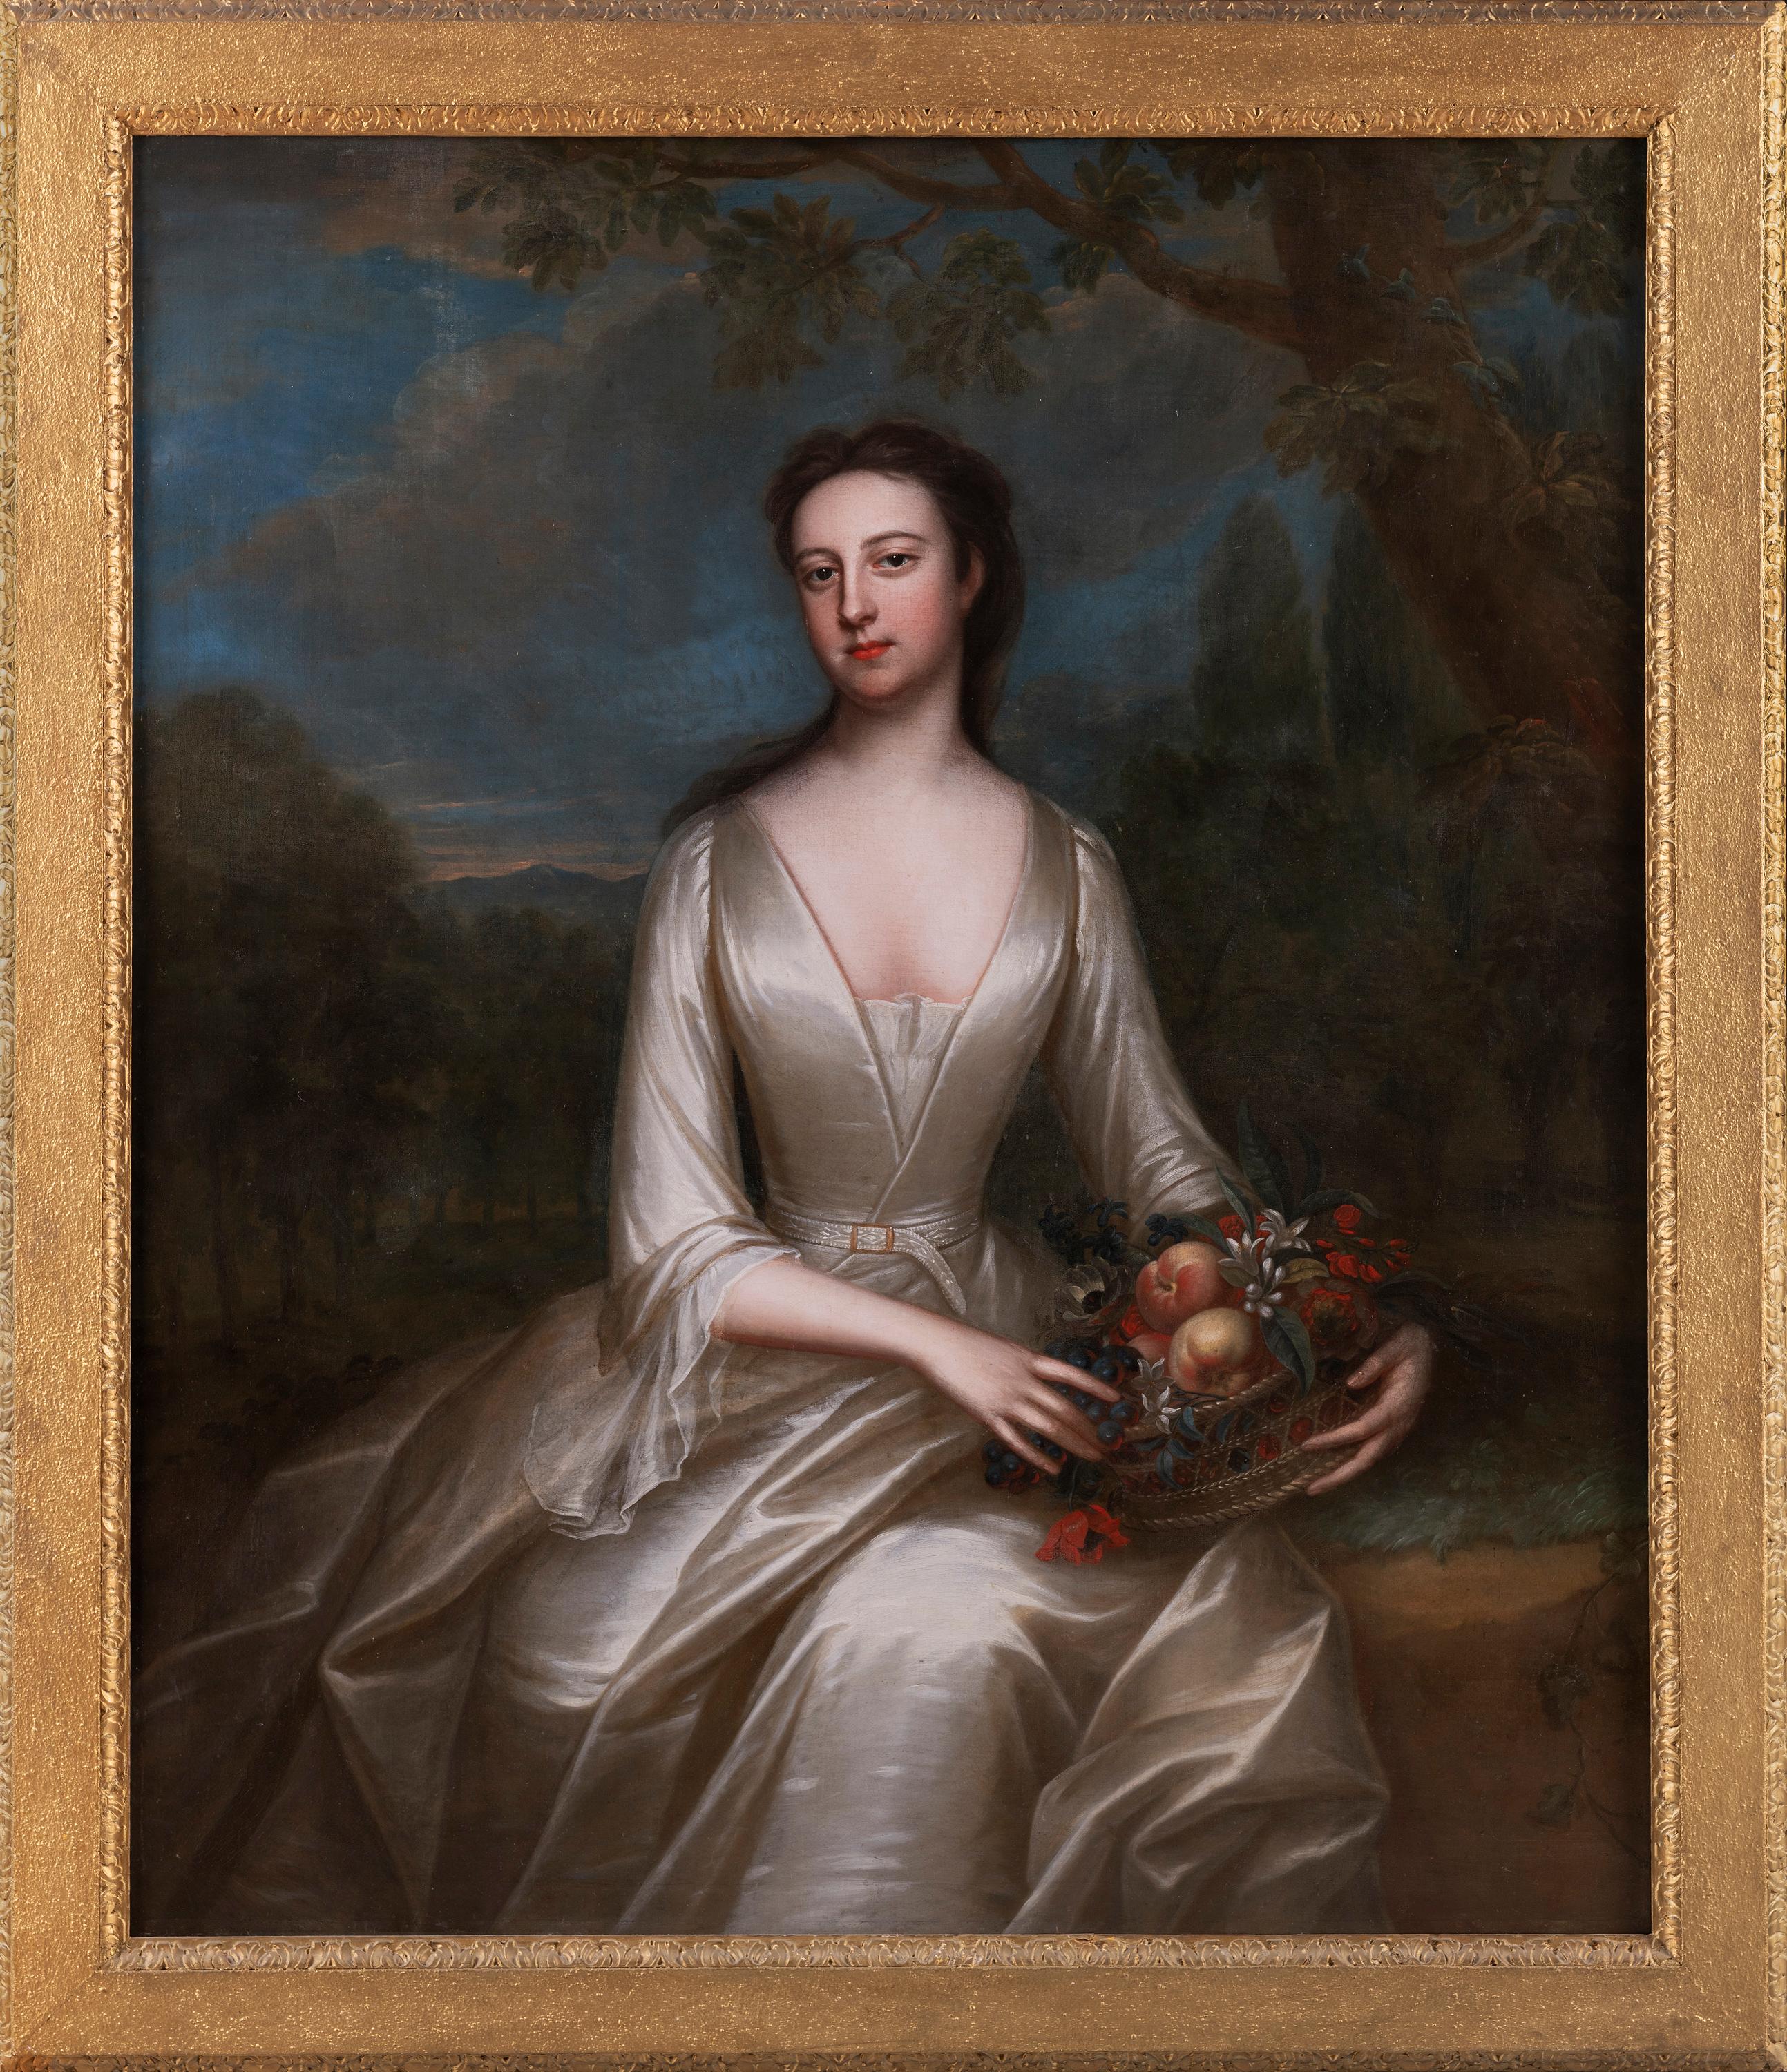 Portrait of a 'Lady Lucy North, 1st Countess of Guilford' Oil on Canvas by Charles Jervas



Lady Lucy Montagu who married Francis North to become Lady Lucy North, the 1st Countess of Guilford

Lucy was born in 1709, sister of the Earl of